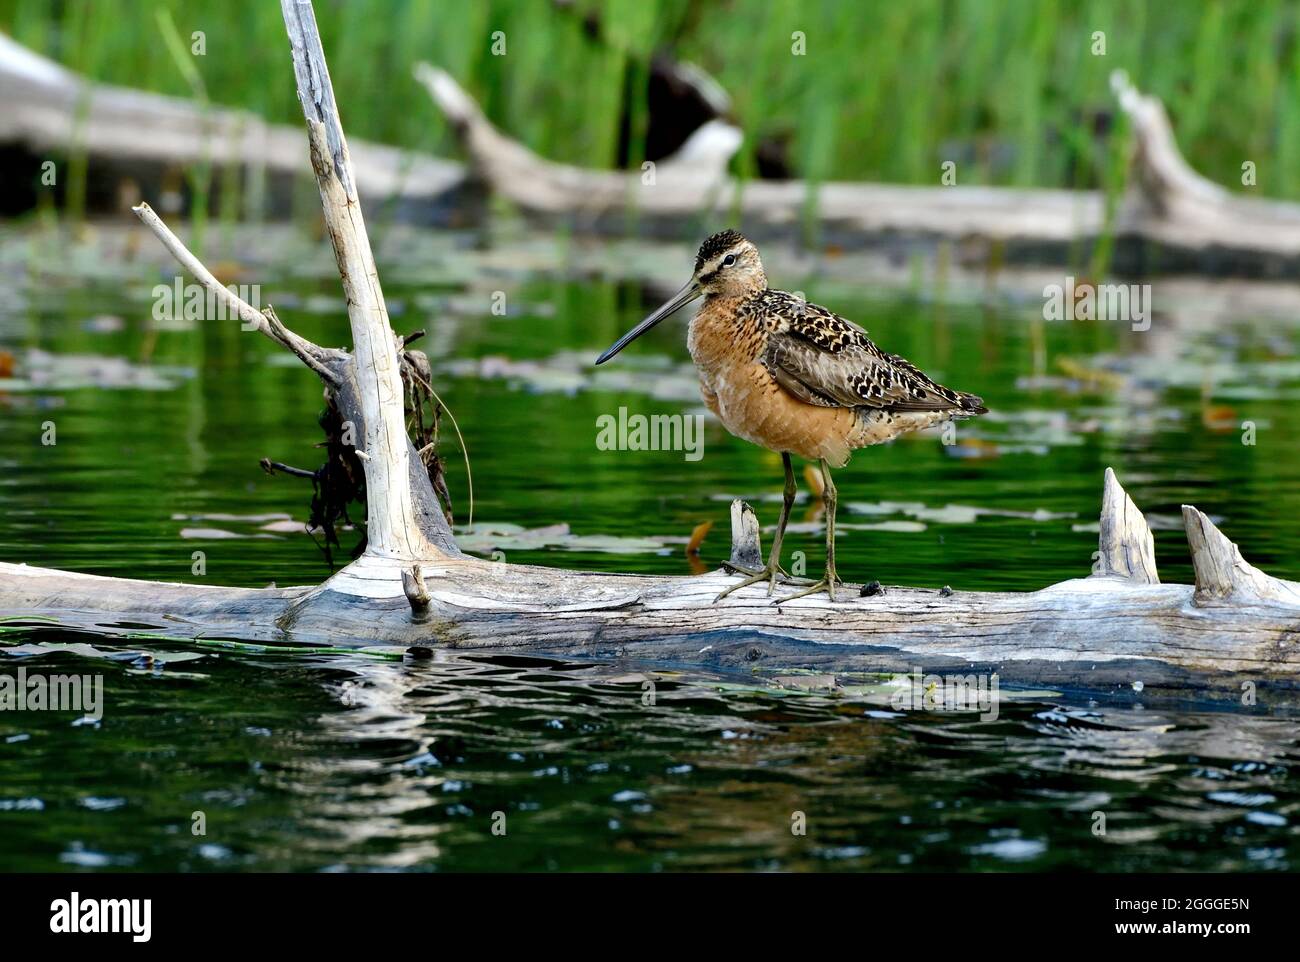 A Long-billed Dowitcher (Limnodromus scolopaceus), shorebird perched on a sunken log in rural Alberta Canada. Stock Photo